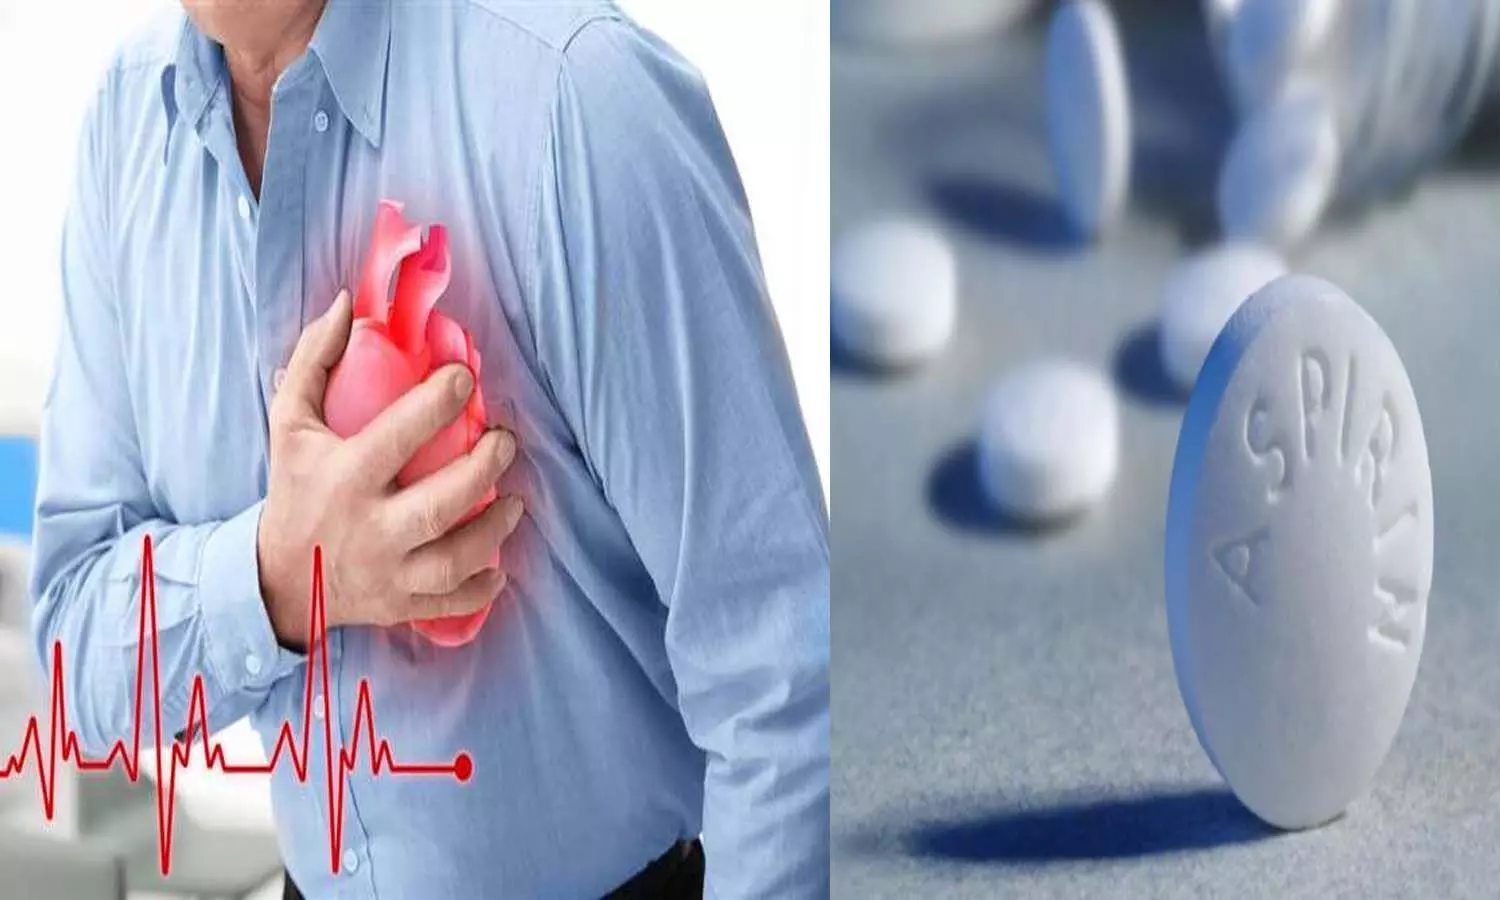 Aspirin use in heart disease has less benefit, more risk